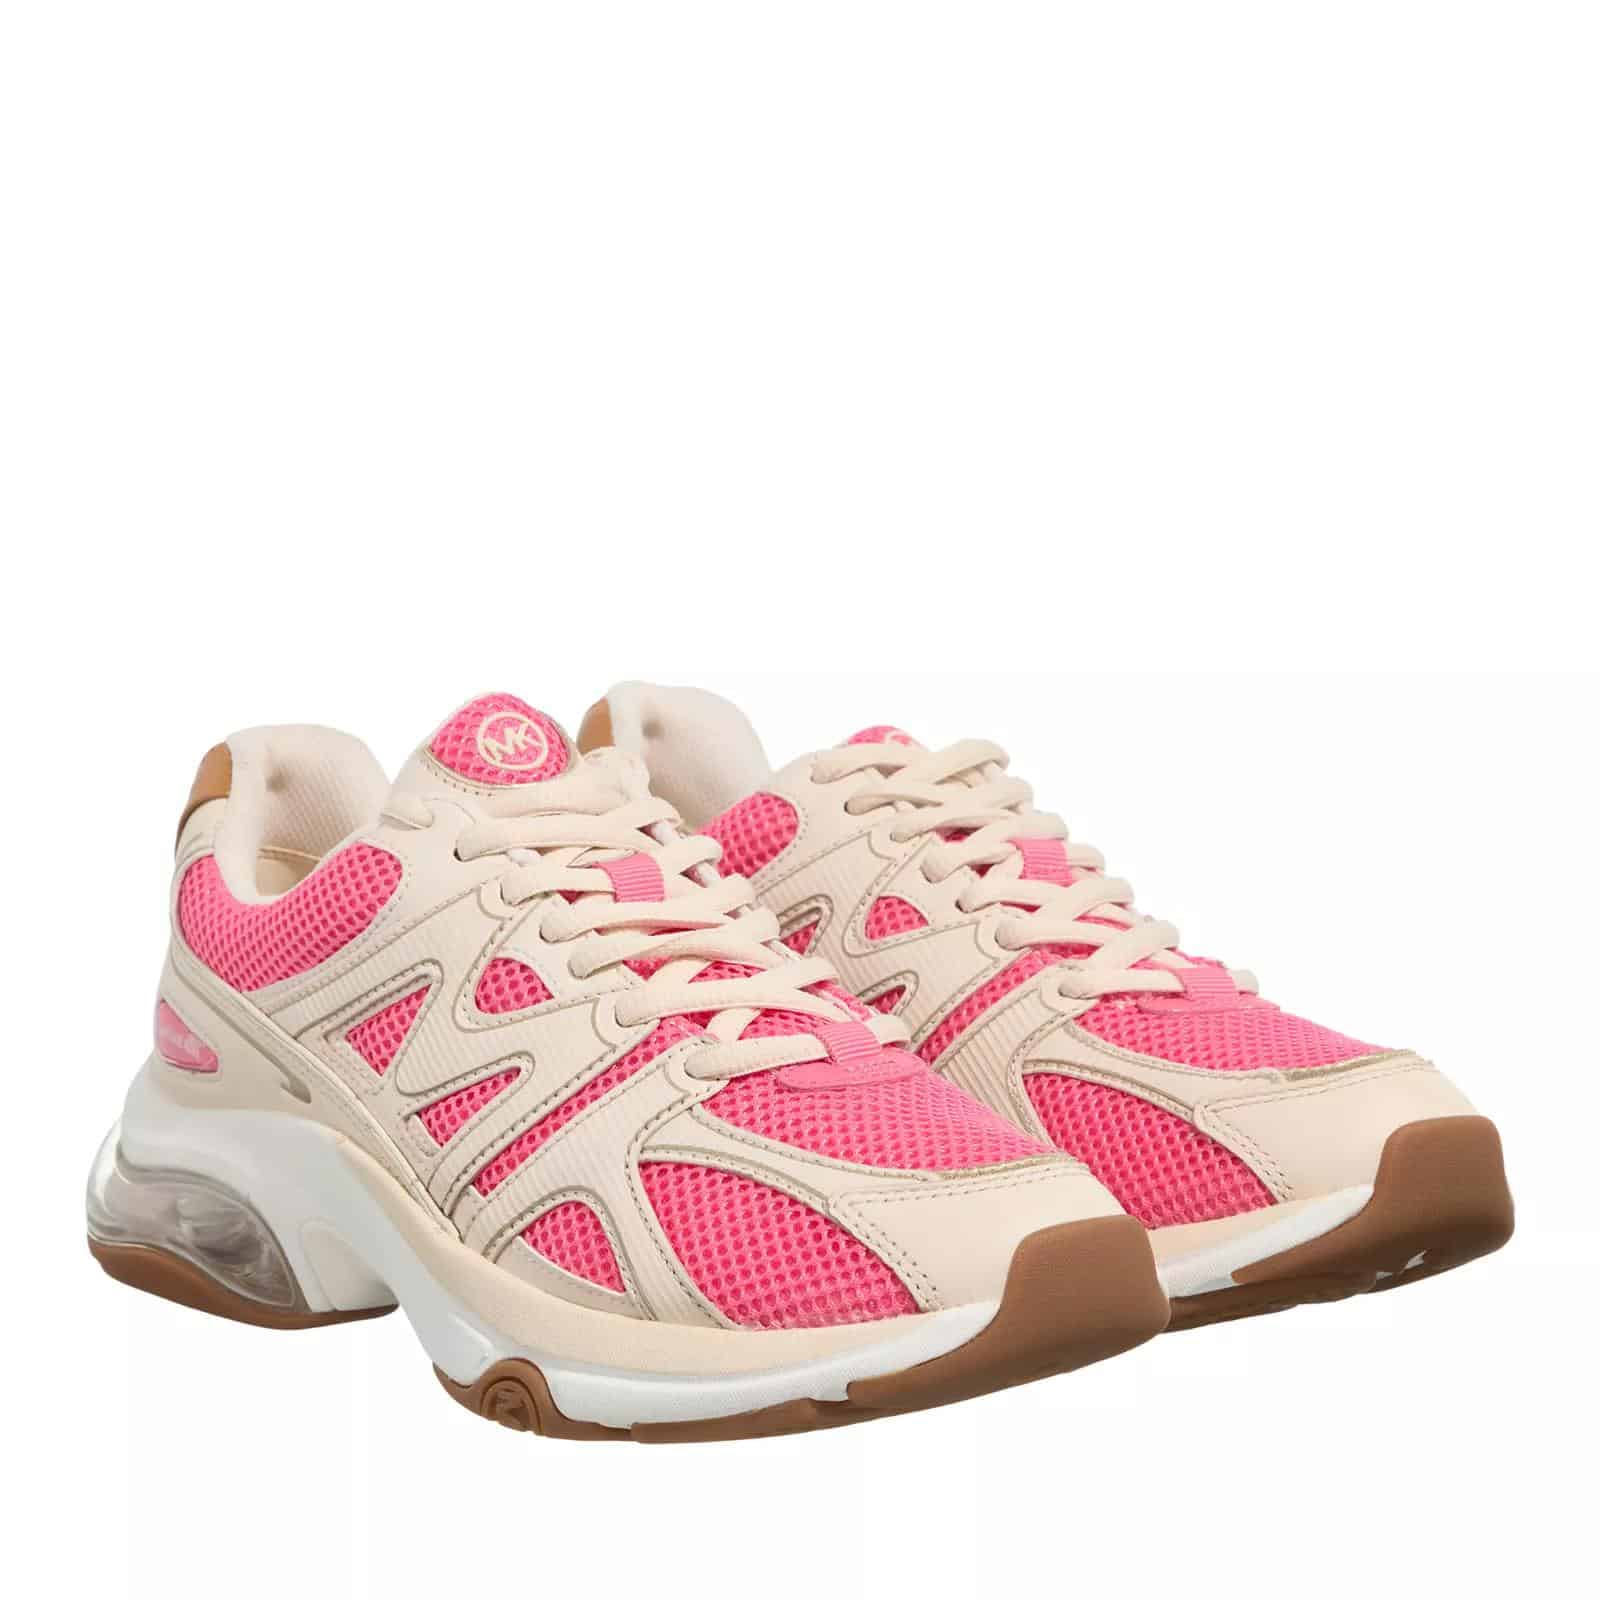 Michael Kors Sneakers - Kit Trainer Extreme in roze